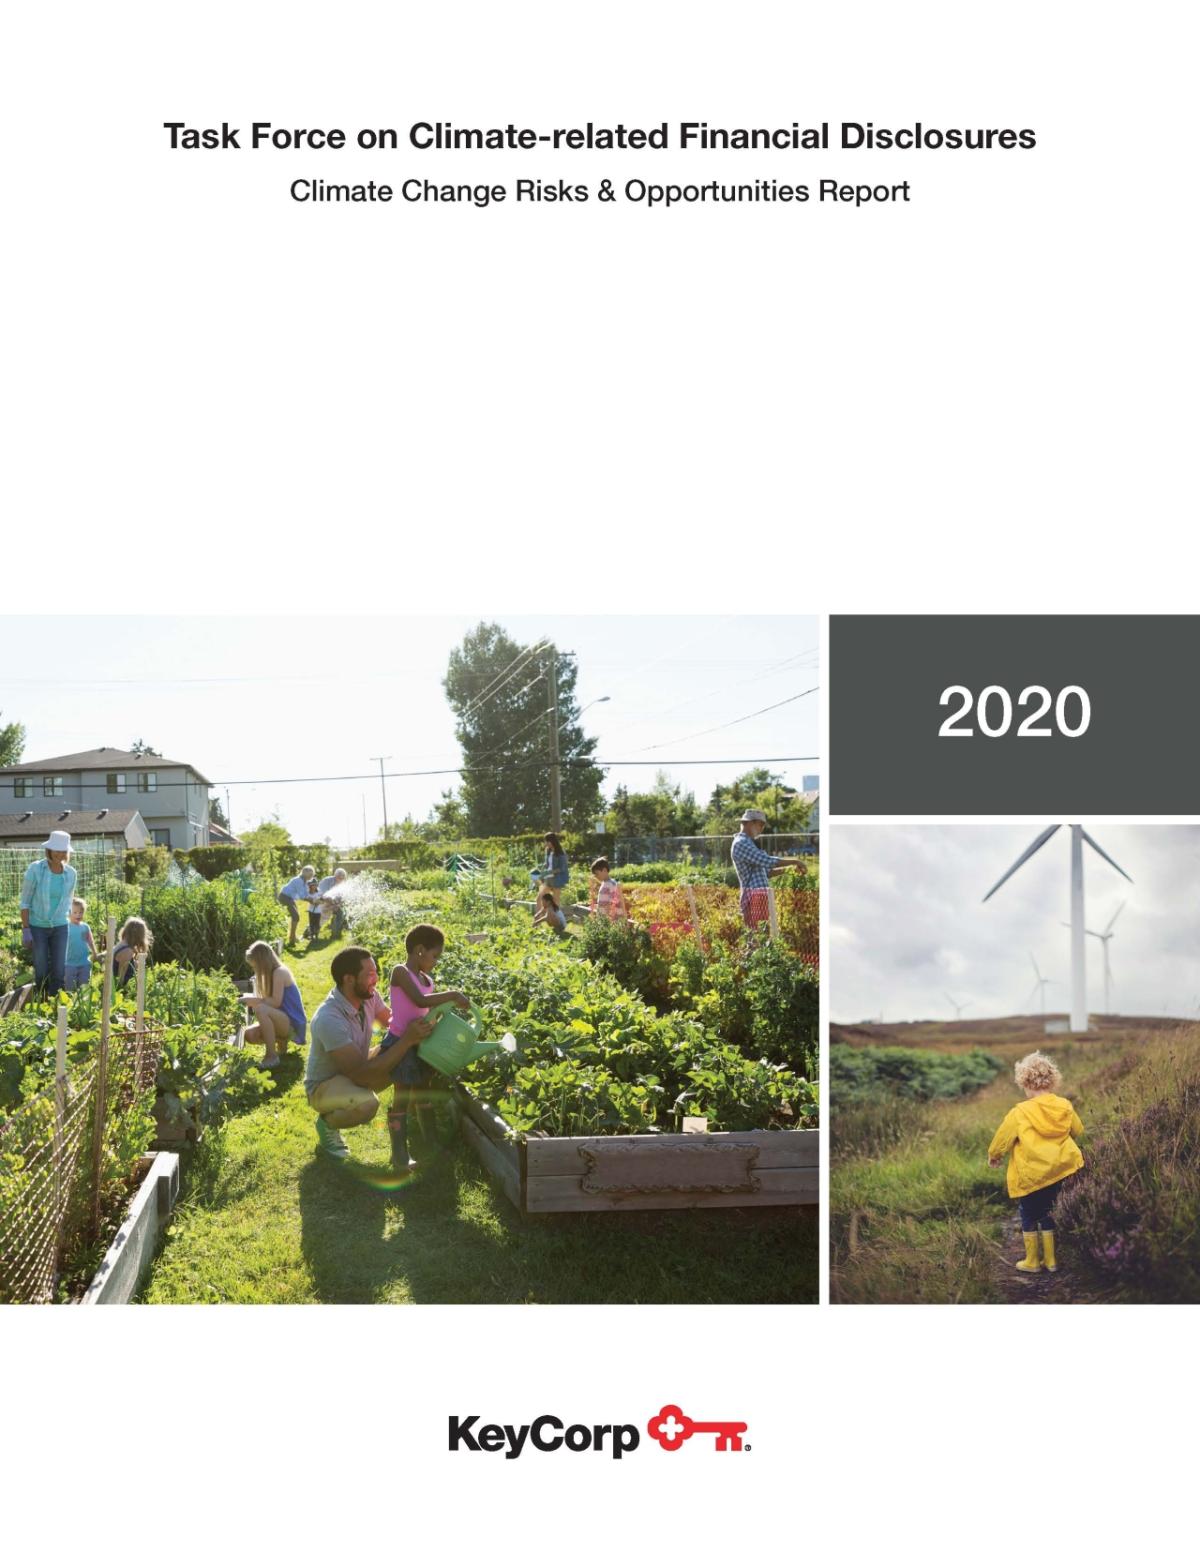 KeyCorp Task Force on Climate-related financial disclosures report; cover shows a woman with a child in a garden.